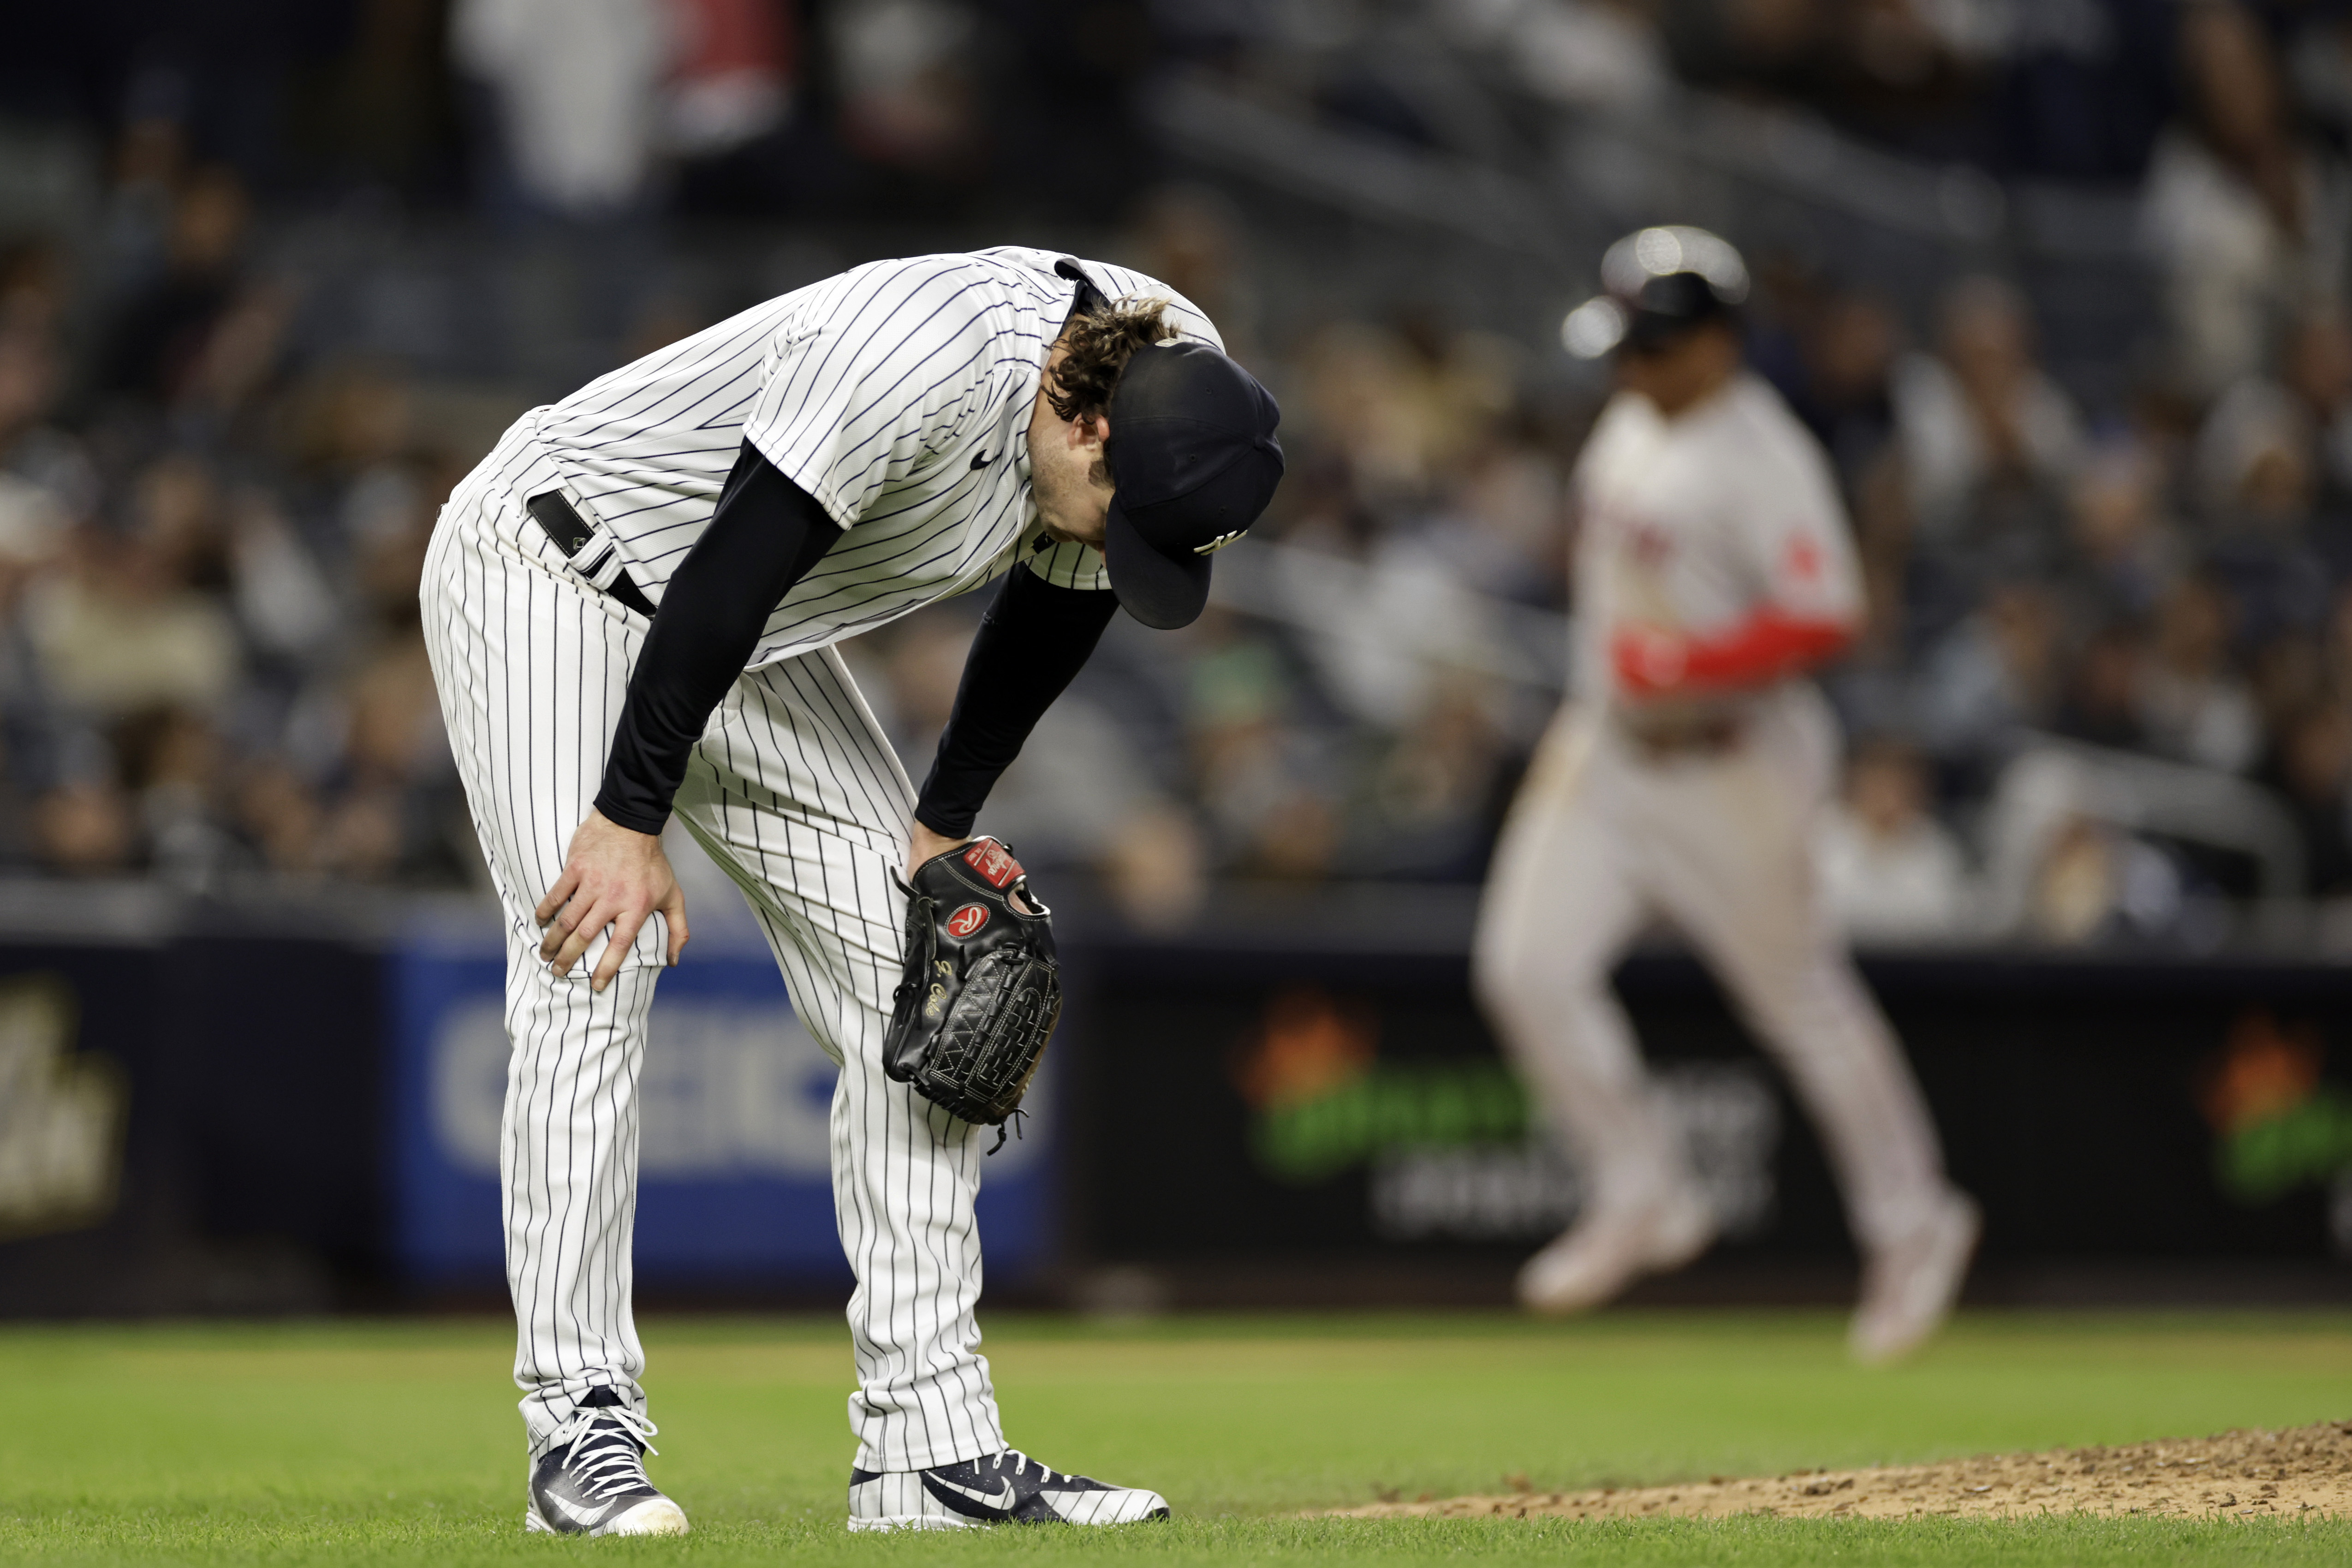 Gerrit Cole Shoves Again To Cap Off His First Regular Season in New York -  Now October Awaits